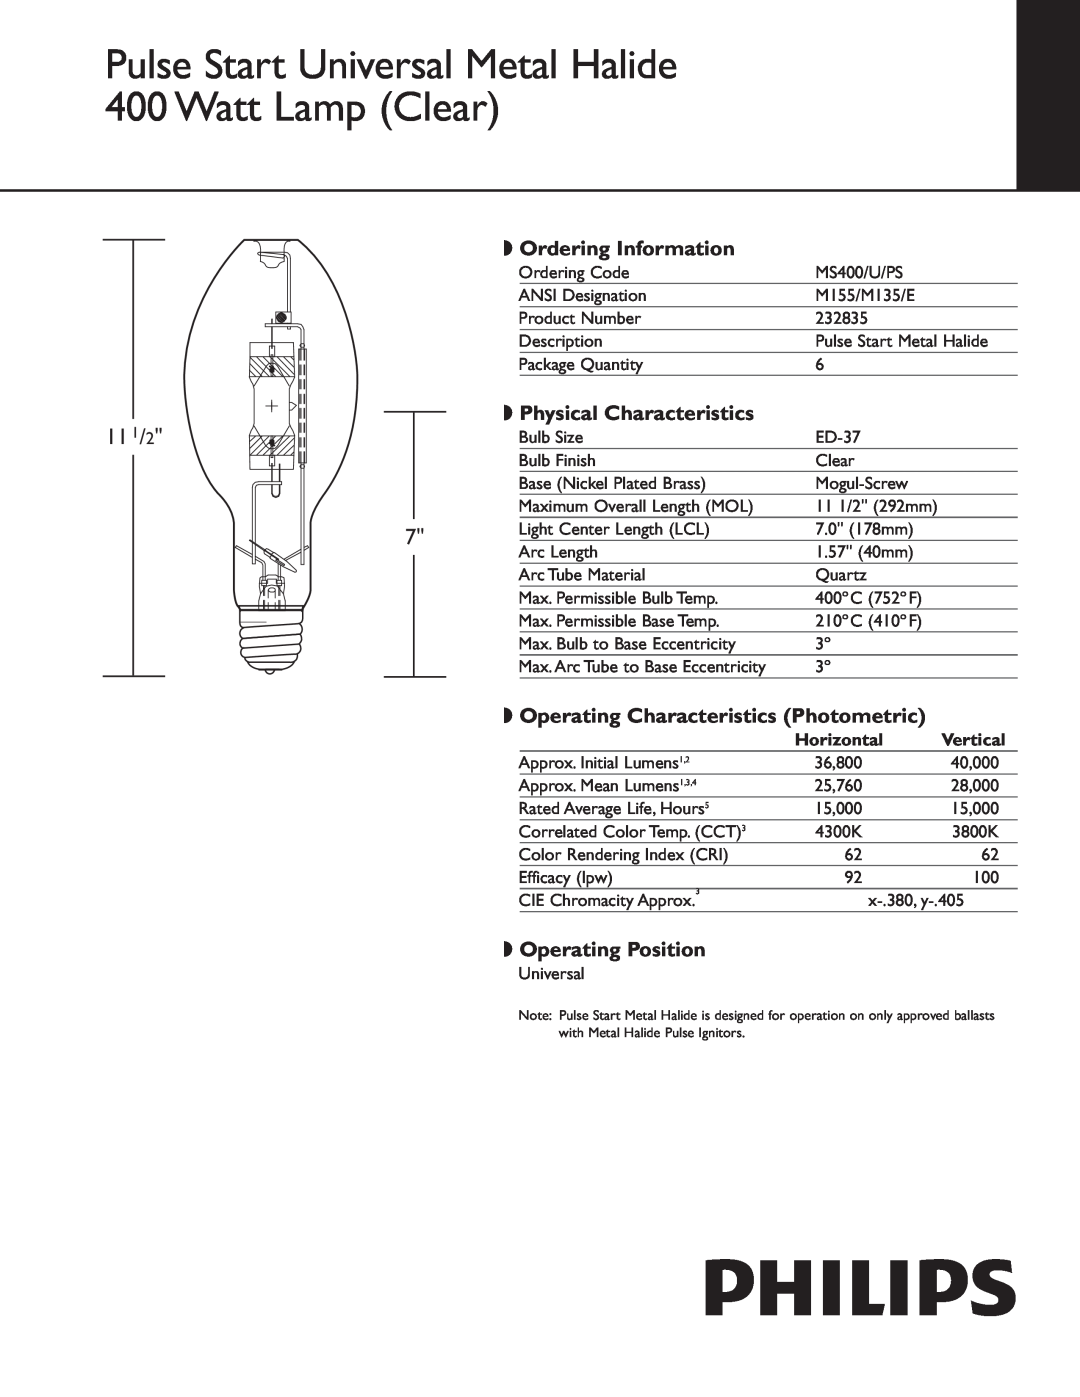 Philips 232835 manual Horizontal, Vertical, 11 1/2, Ordering Information, Physical Characteristics, Operating Position 